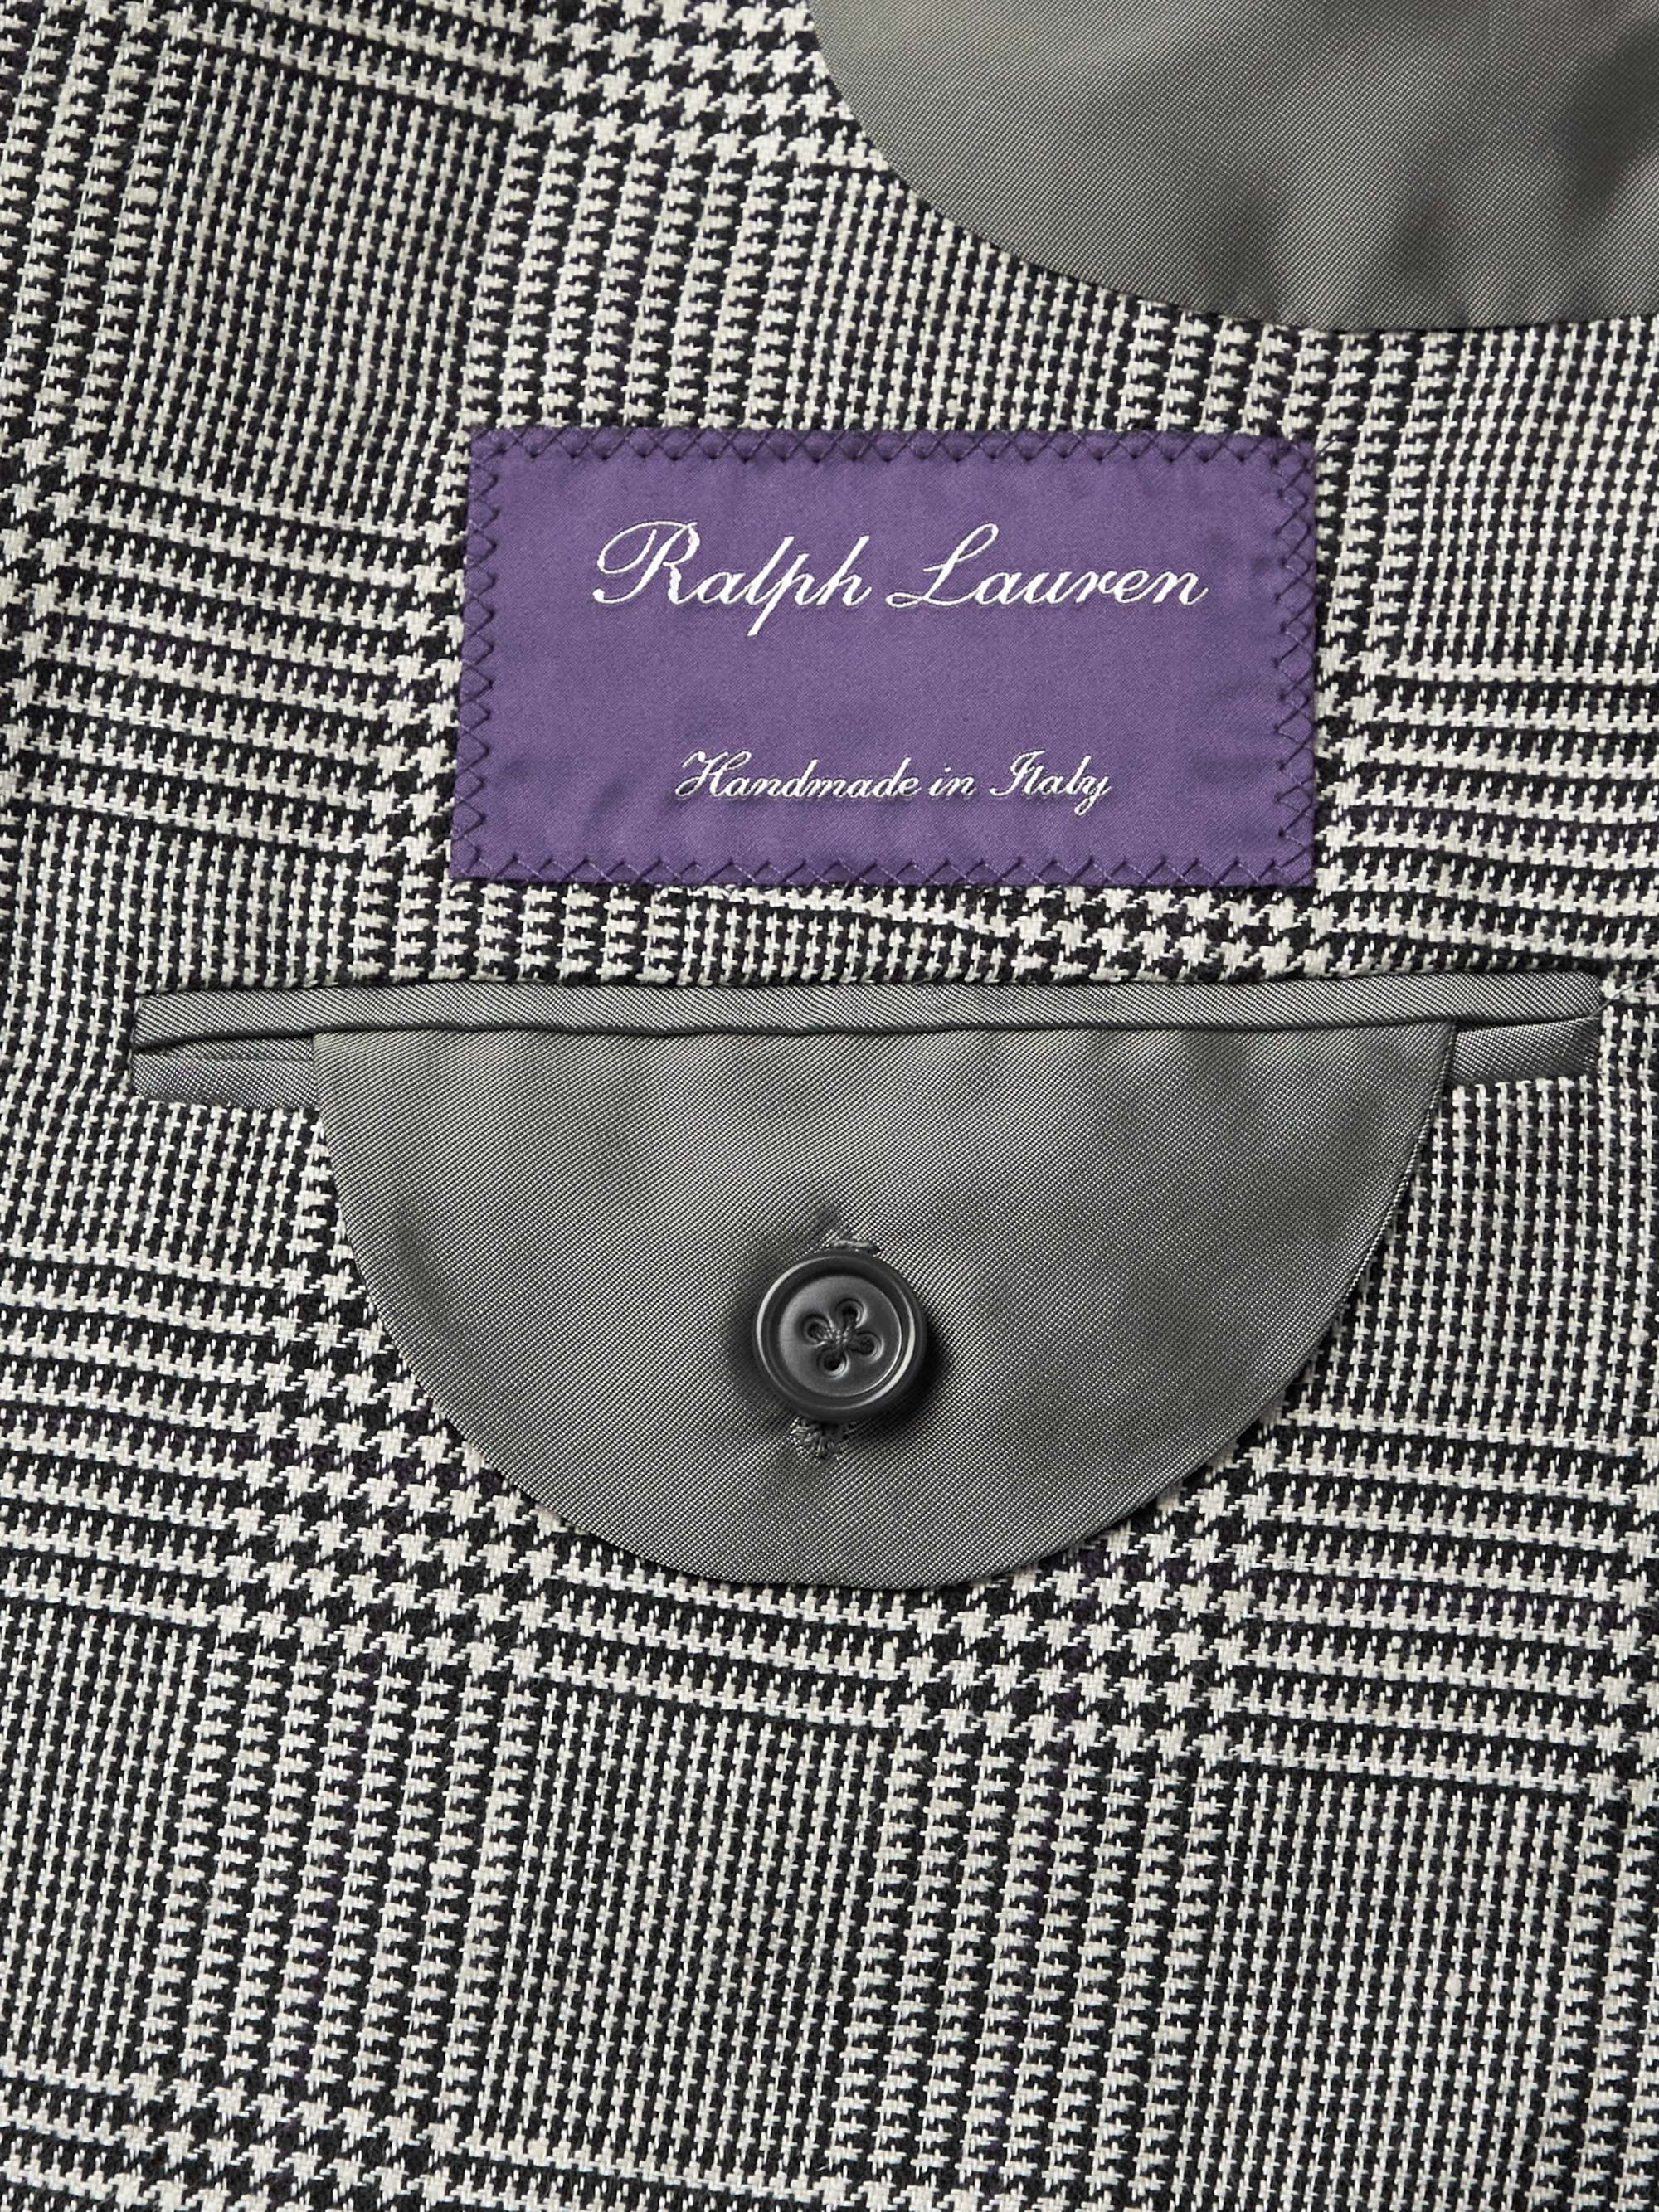 RALPH LAUREN PURPLE LABEL Kent Double-Breasted Prince of Wales Checked Wool Suit Jacket